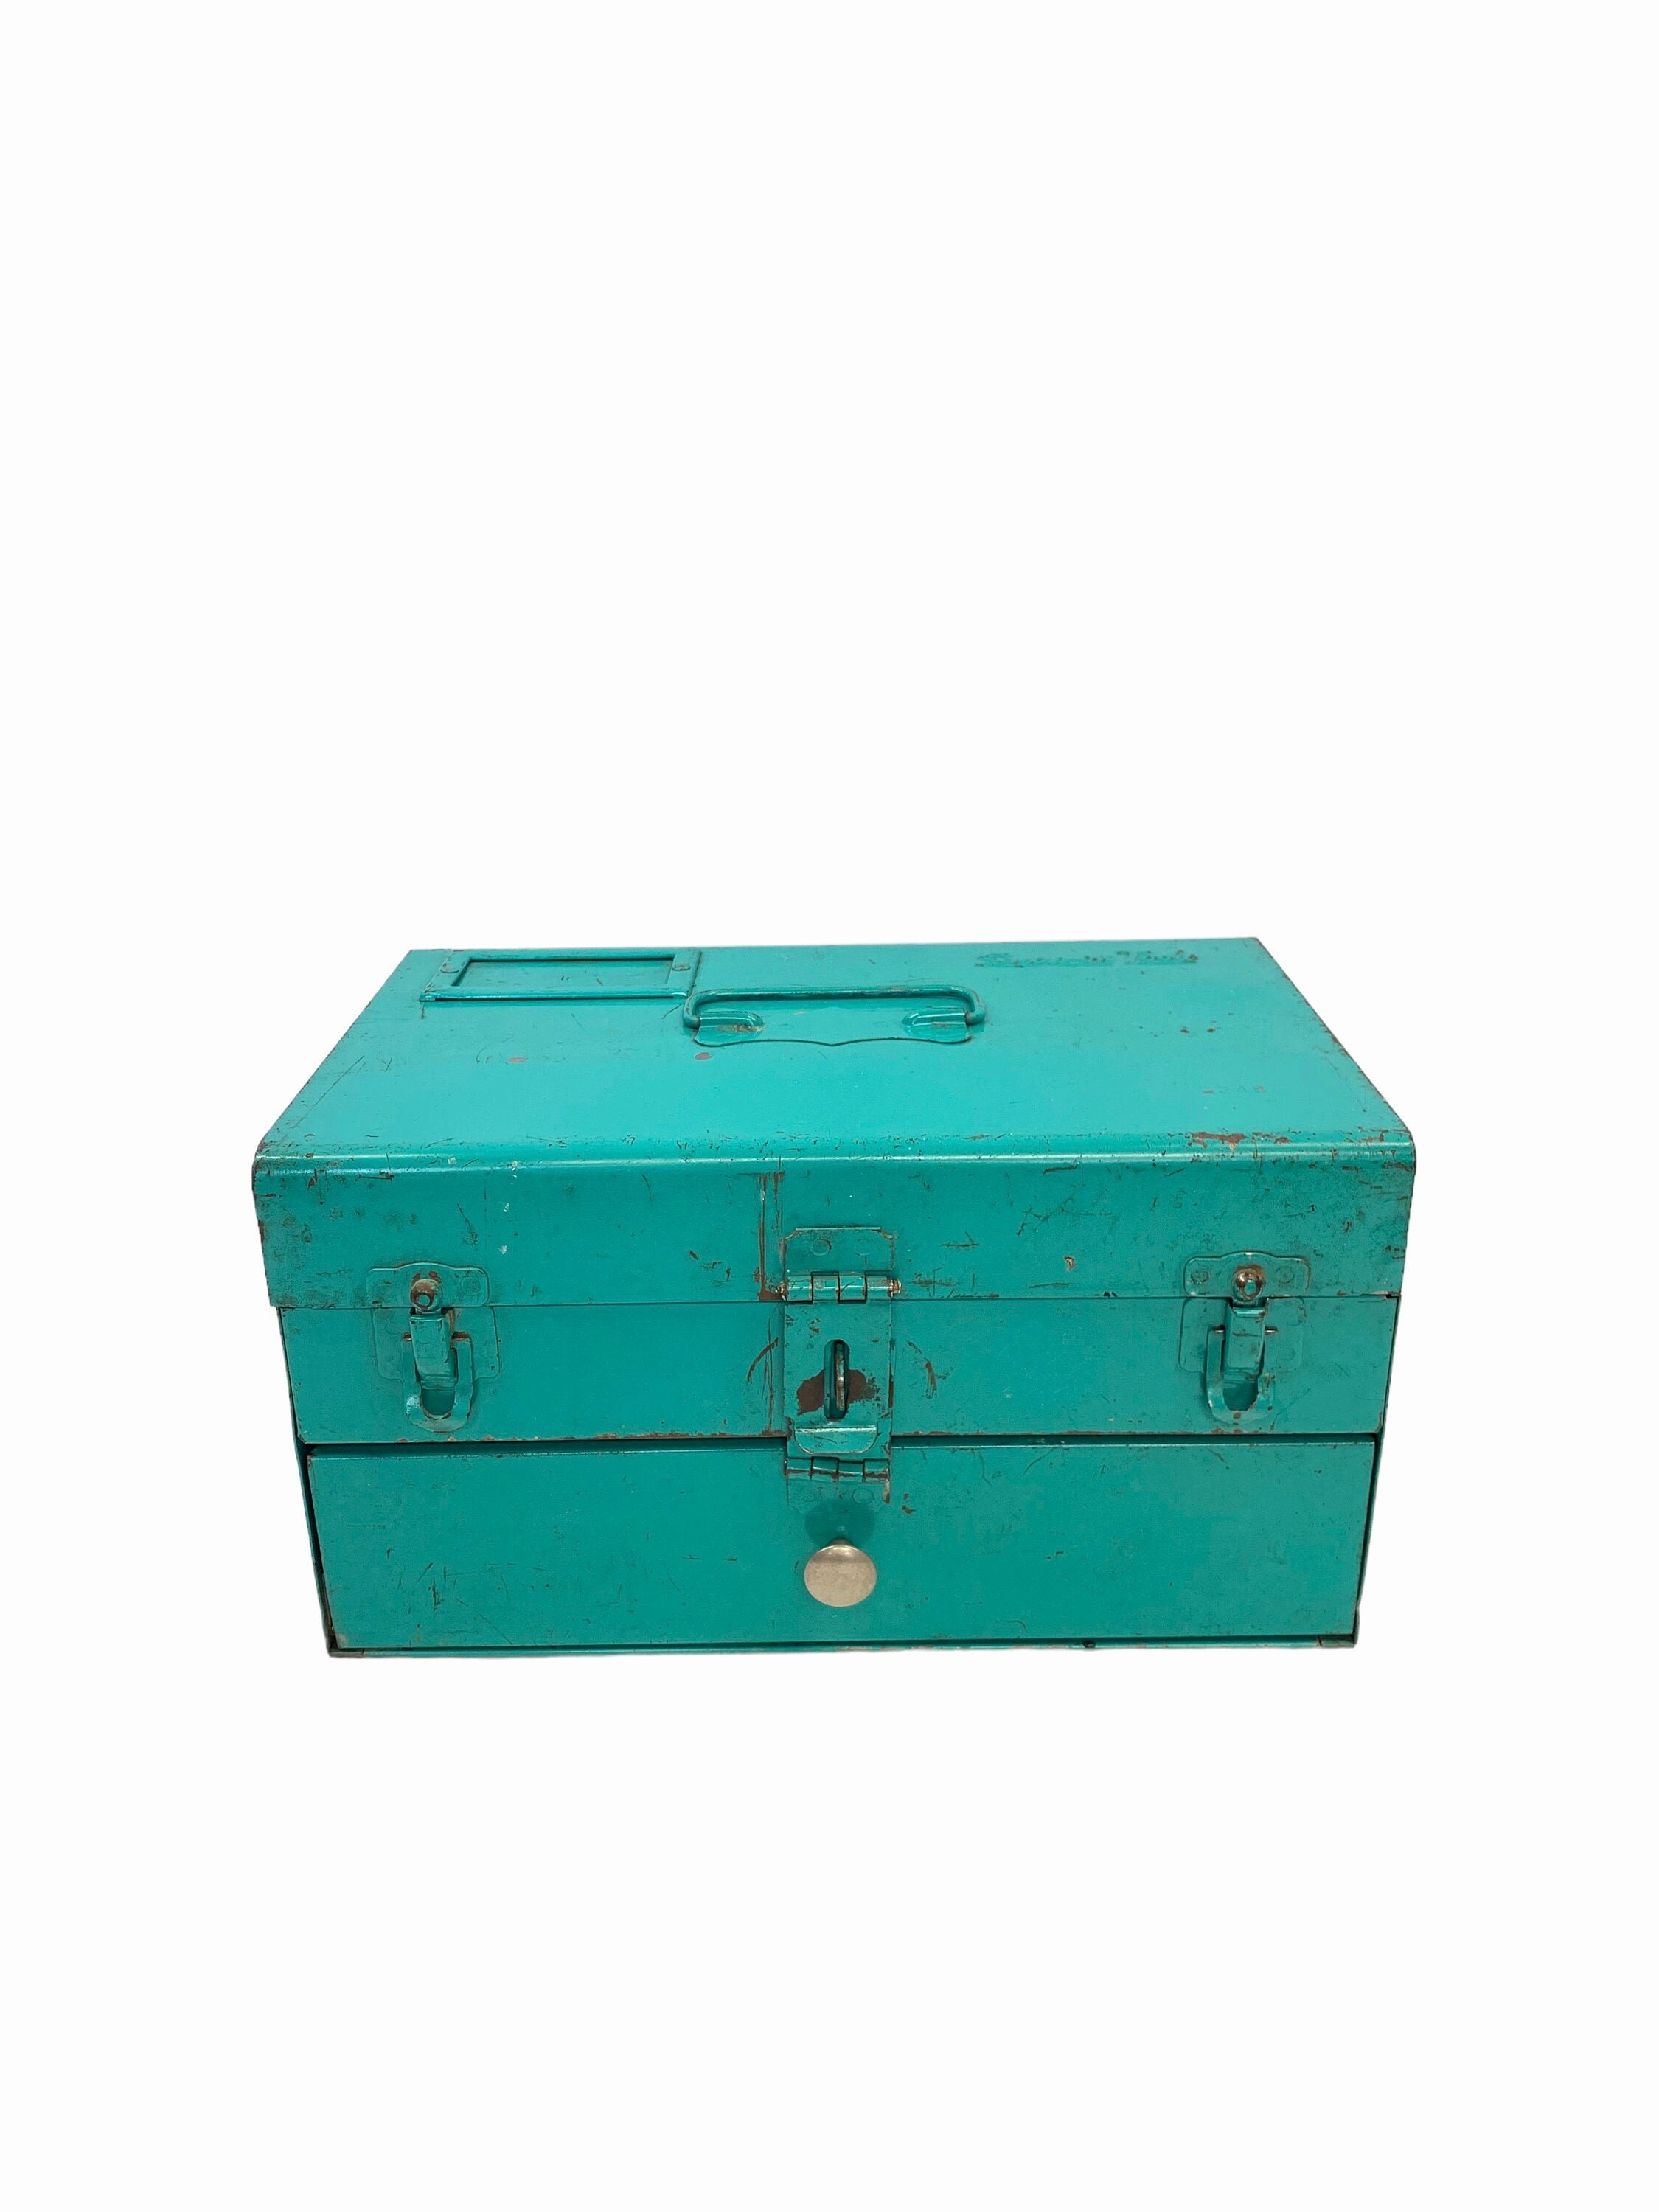 RESERVED for Rachel~Rare 1962 Snap-On Teal Green Metal Mini Tool  Box~Vintage Snap-On Tools Small Tool Box XPL-994-4~Man Cave~Shop